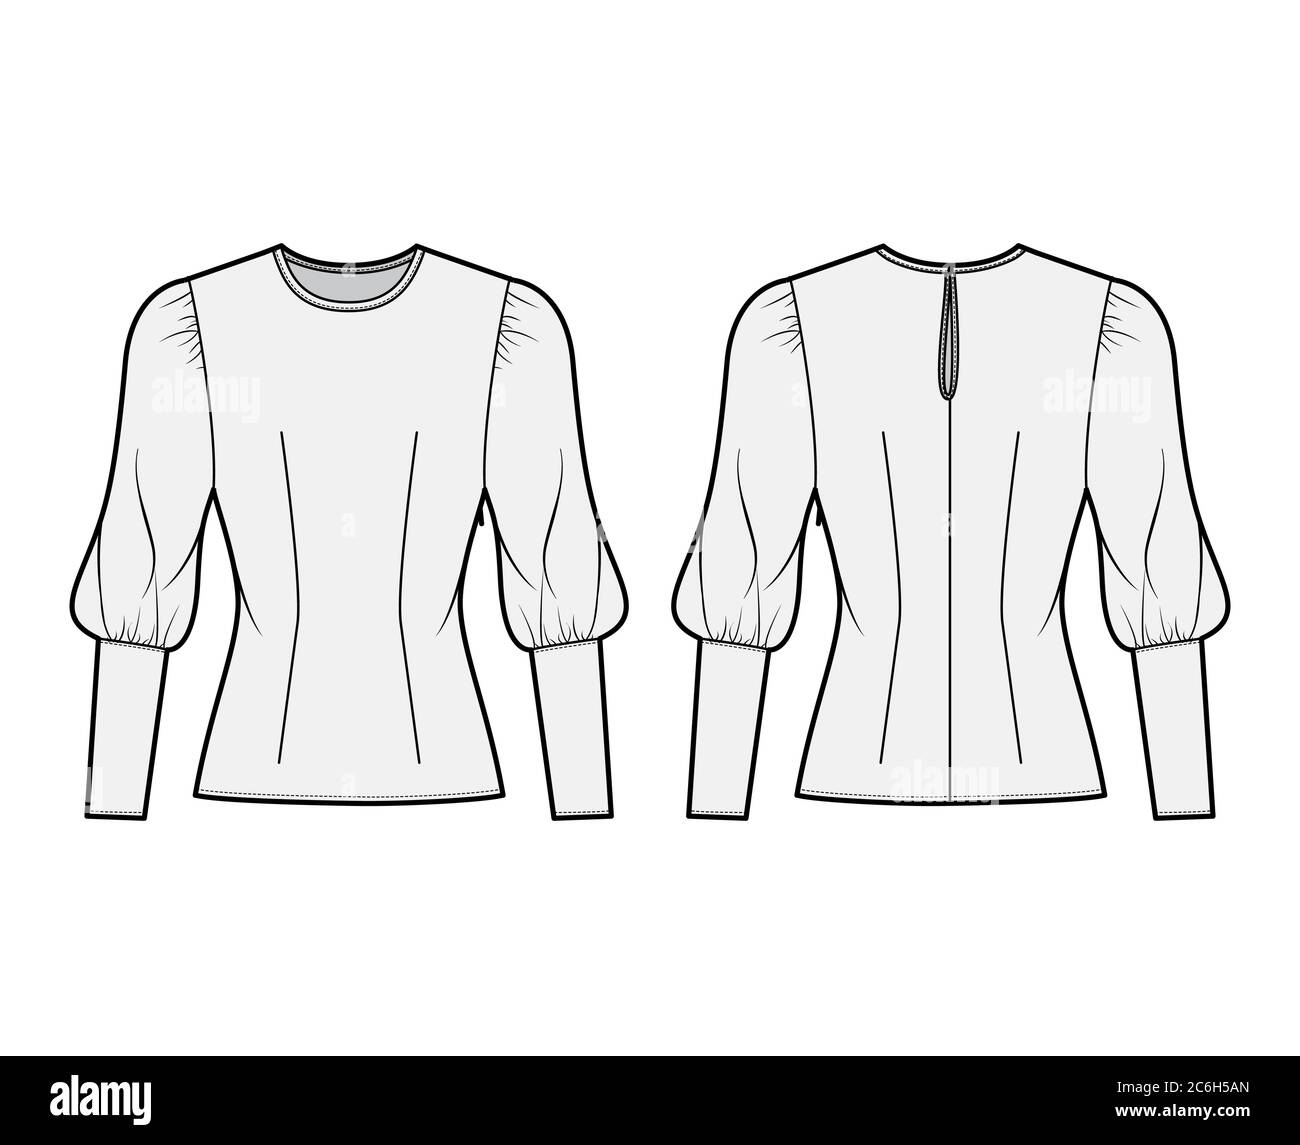 Blouse technical fashion illustration with round neckline, puffy mutton sleeves, fitted body. Flat apparel template front, back grey color. Women, men unisex CAD garment designer mockup Stock Vector